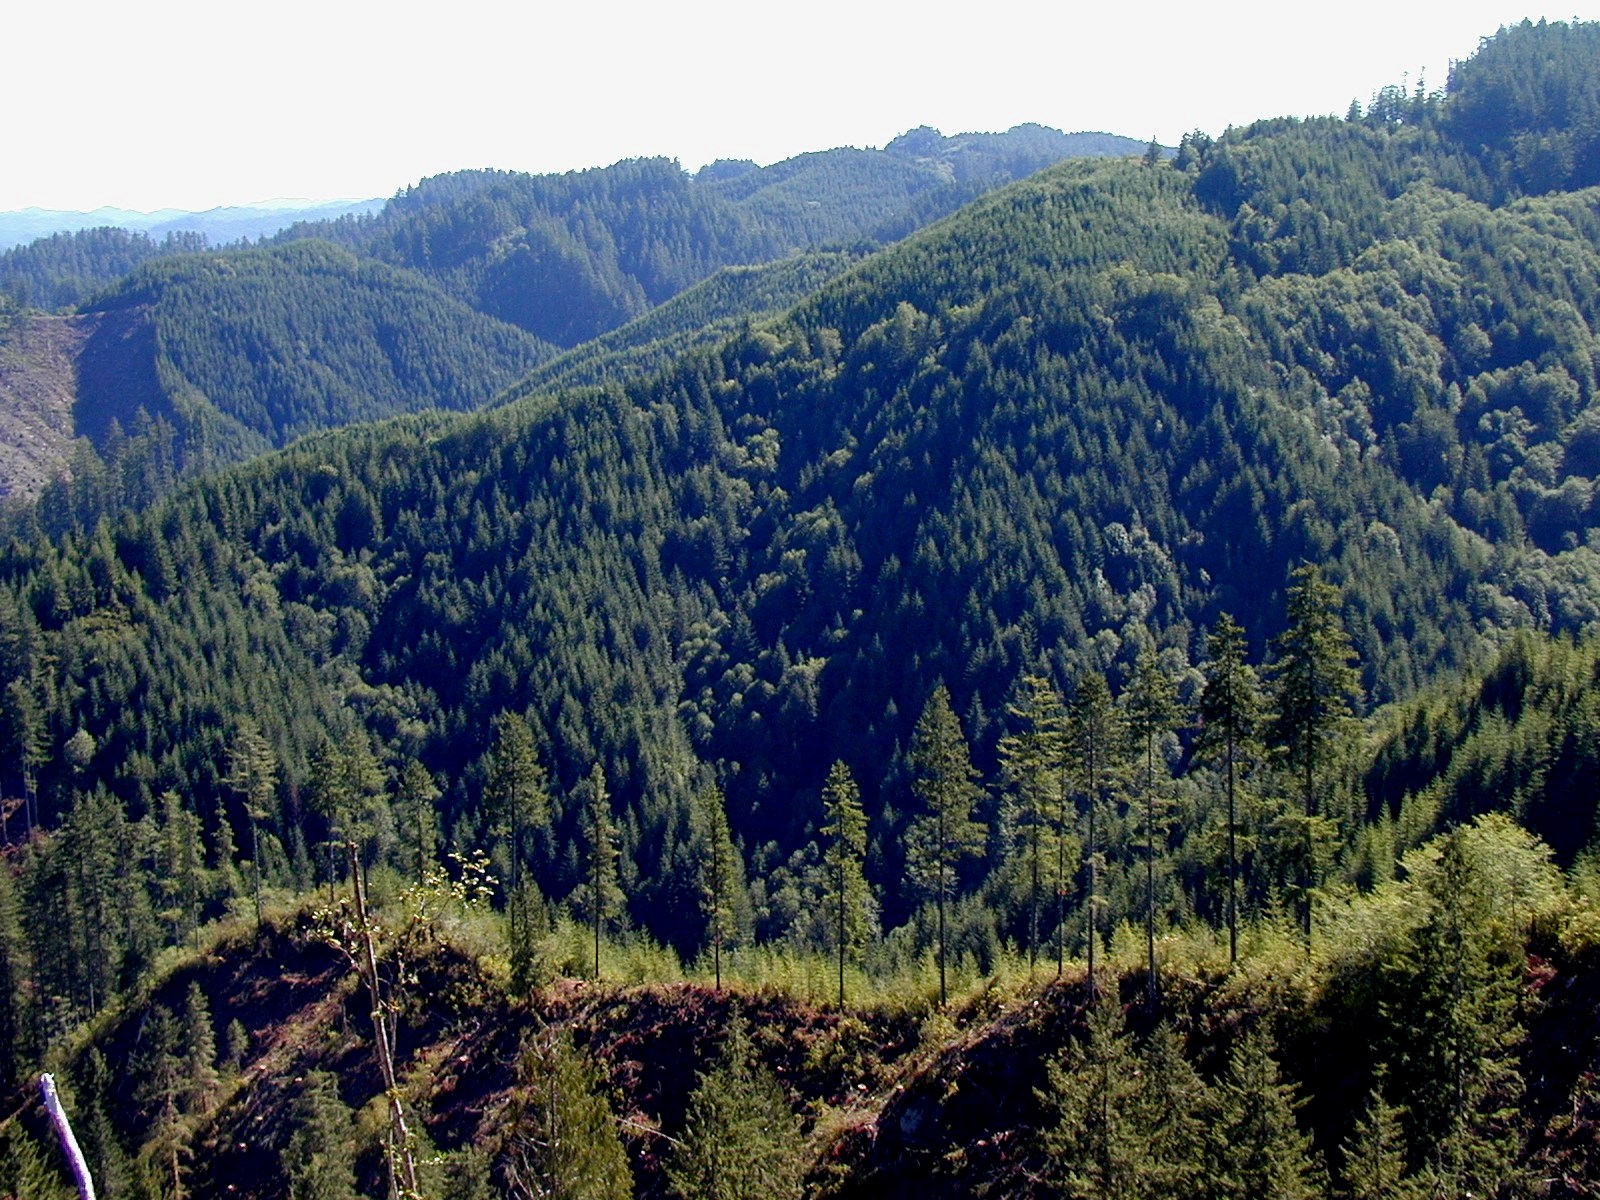 Elliott State Forest Spared From the Chopping Block – For Now